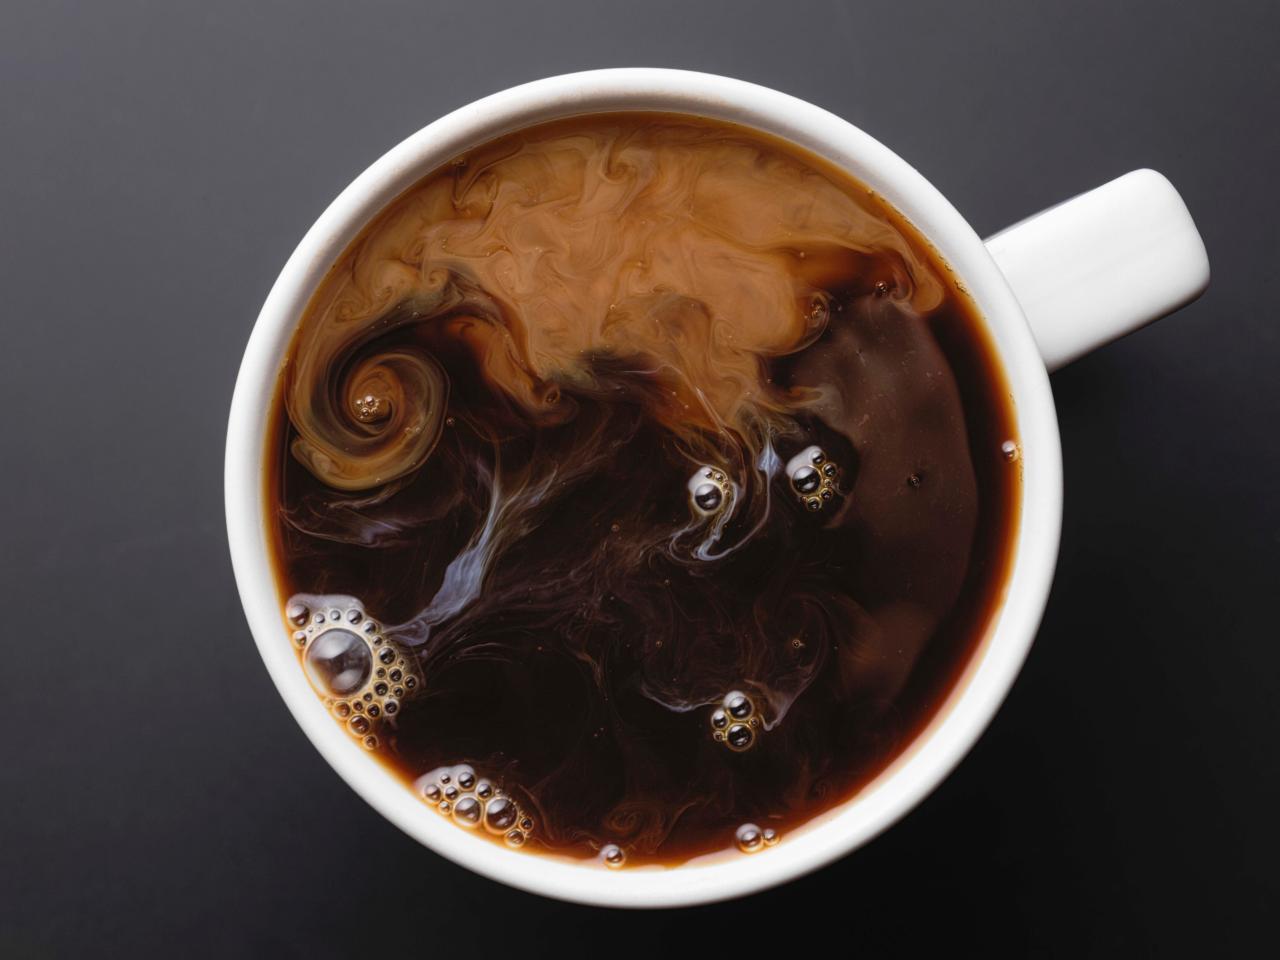 Is Coffee Good for You? Benefits & Risks, According to an RD